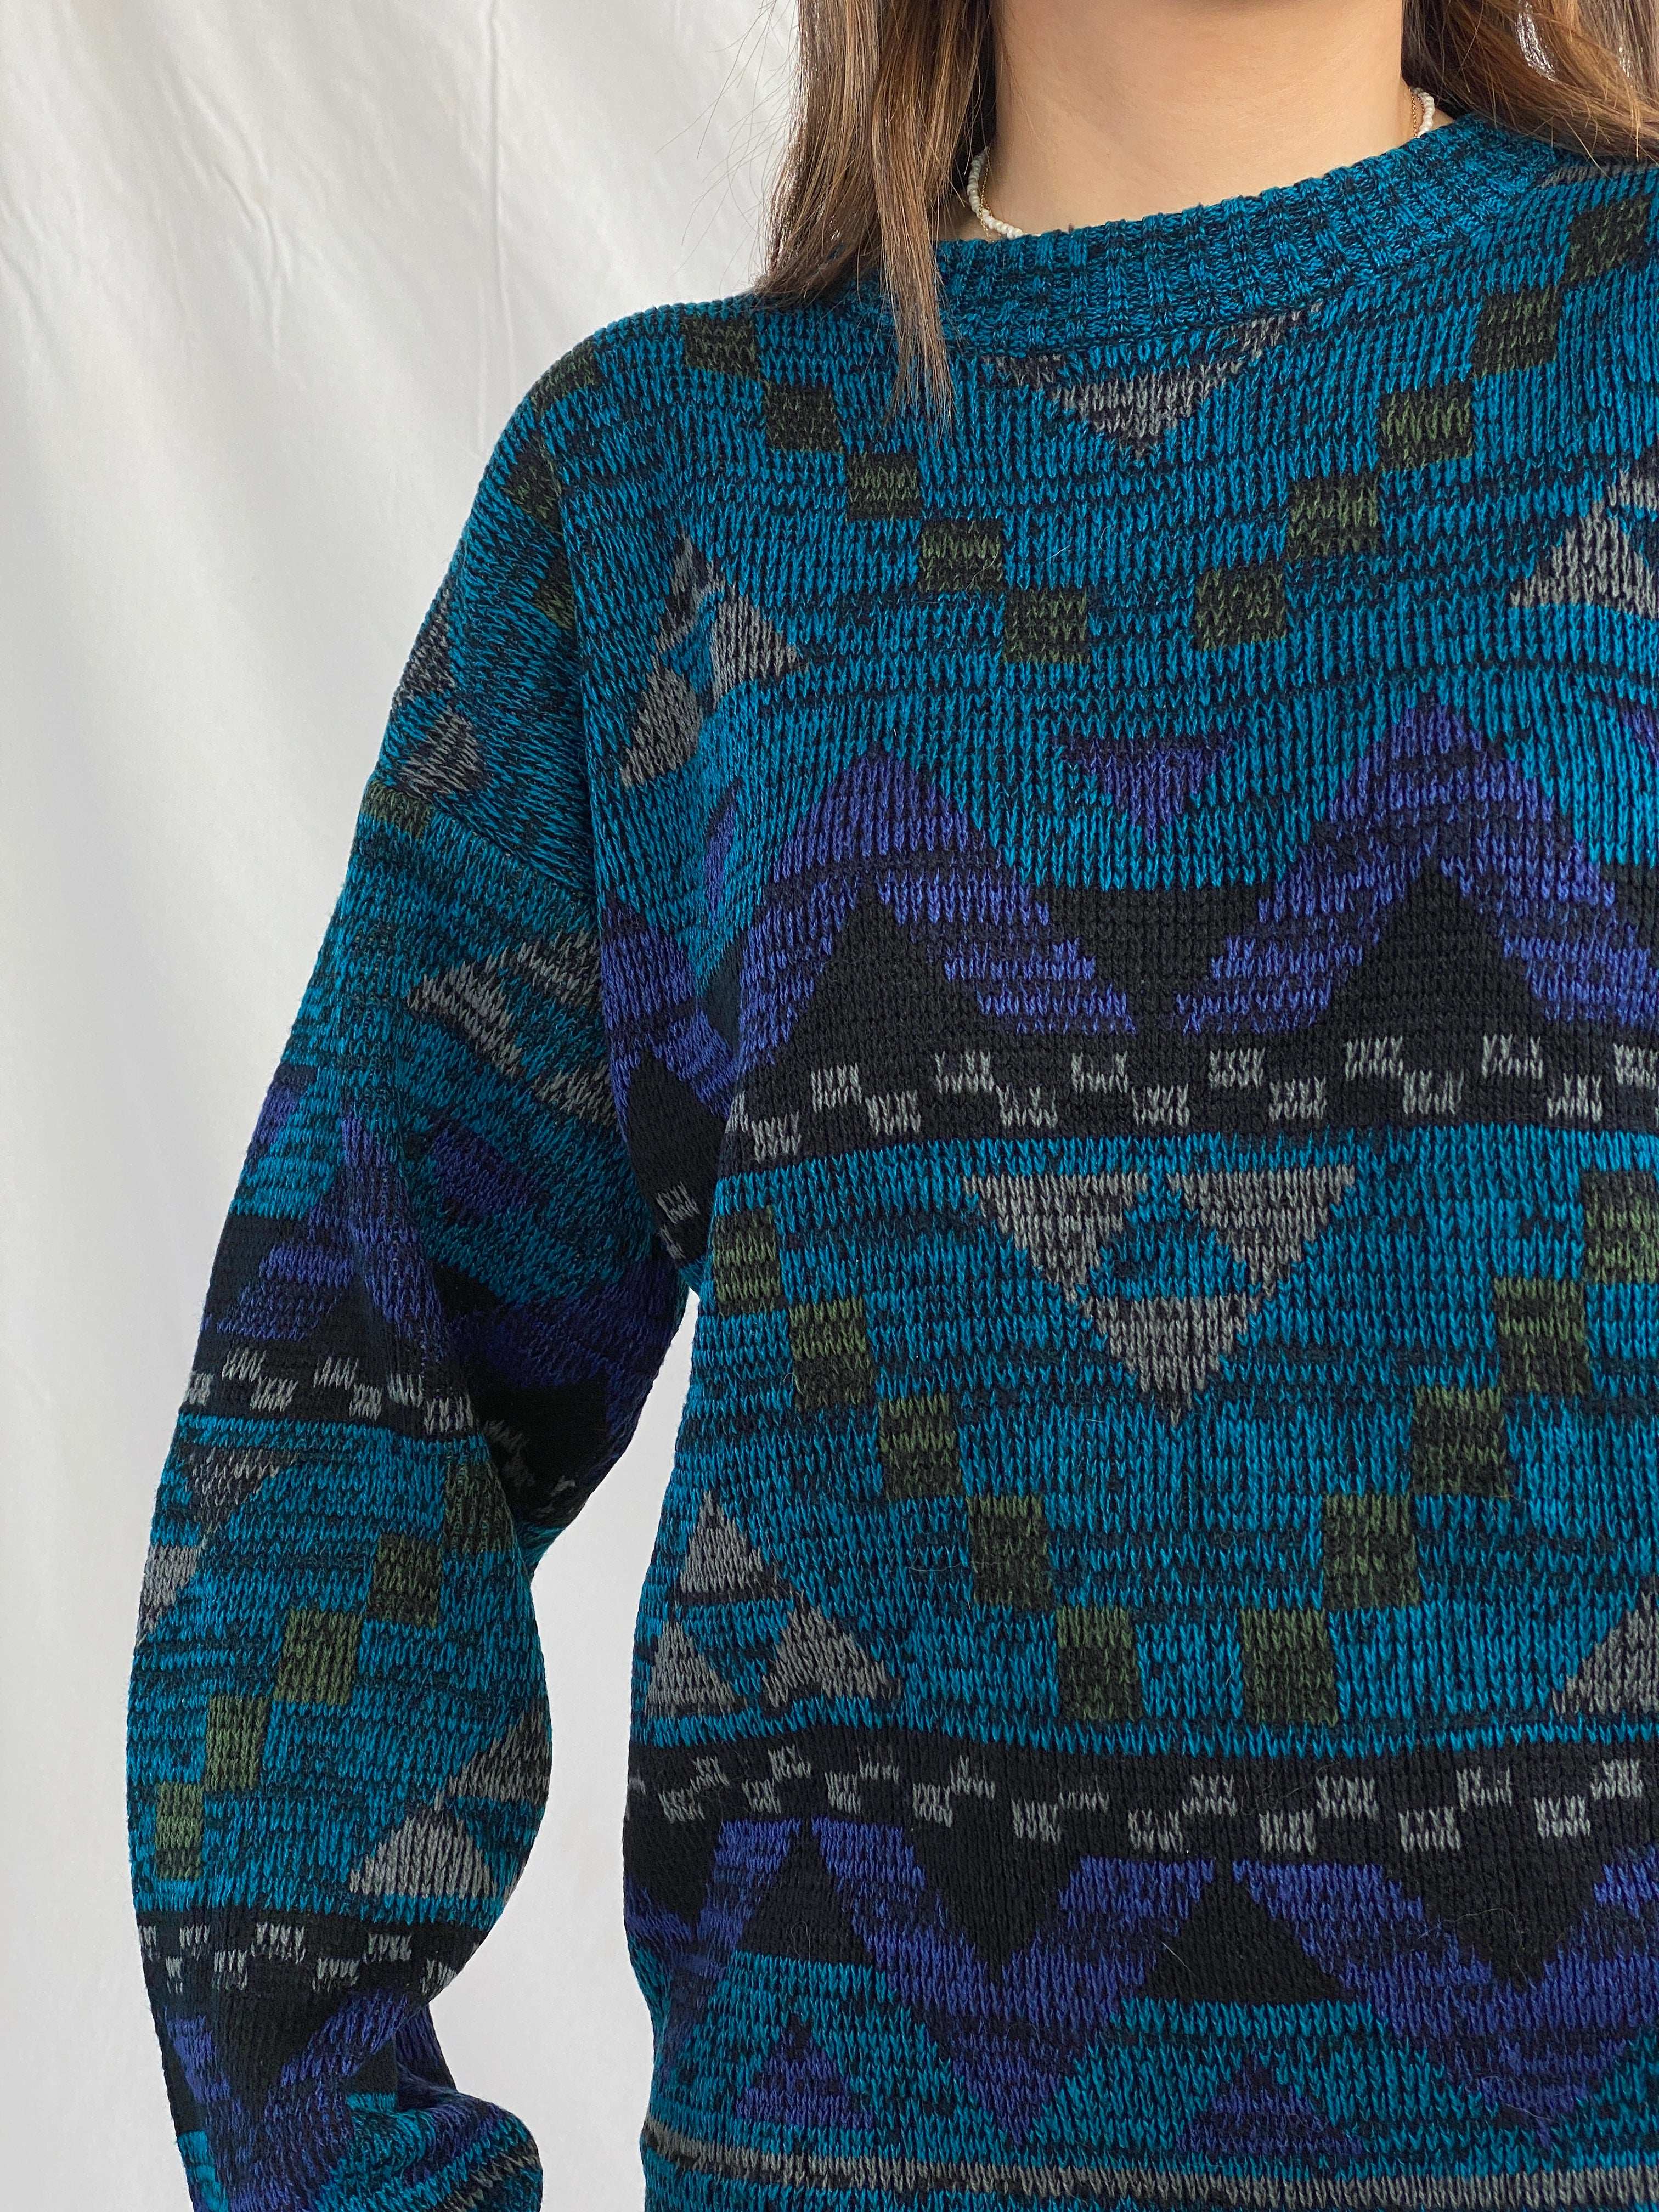 Vintage Permit Geometric Knitted Sweater - Balagan Vintage Sweater 90s, Juana, knitted sweater, NEW IN, oversized sweater, printed sweater, sweater